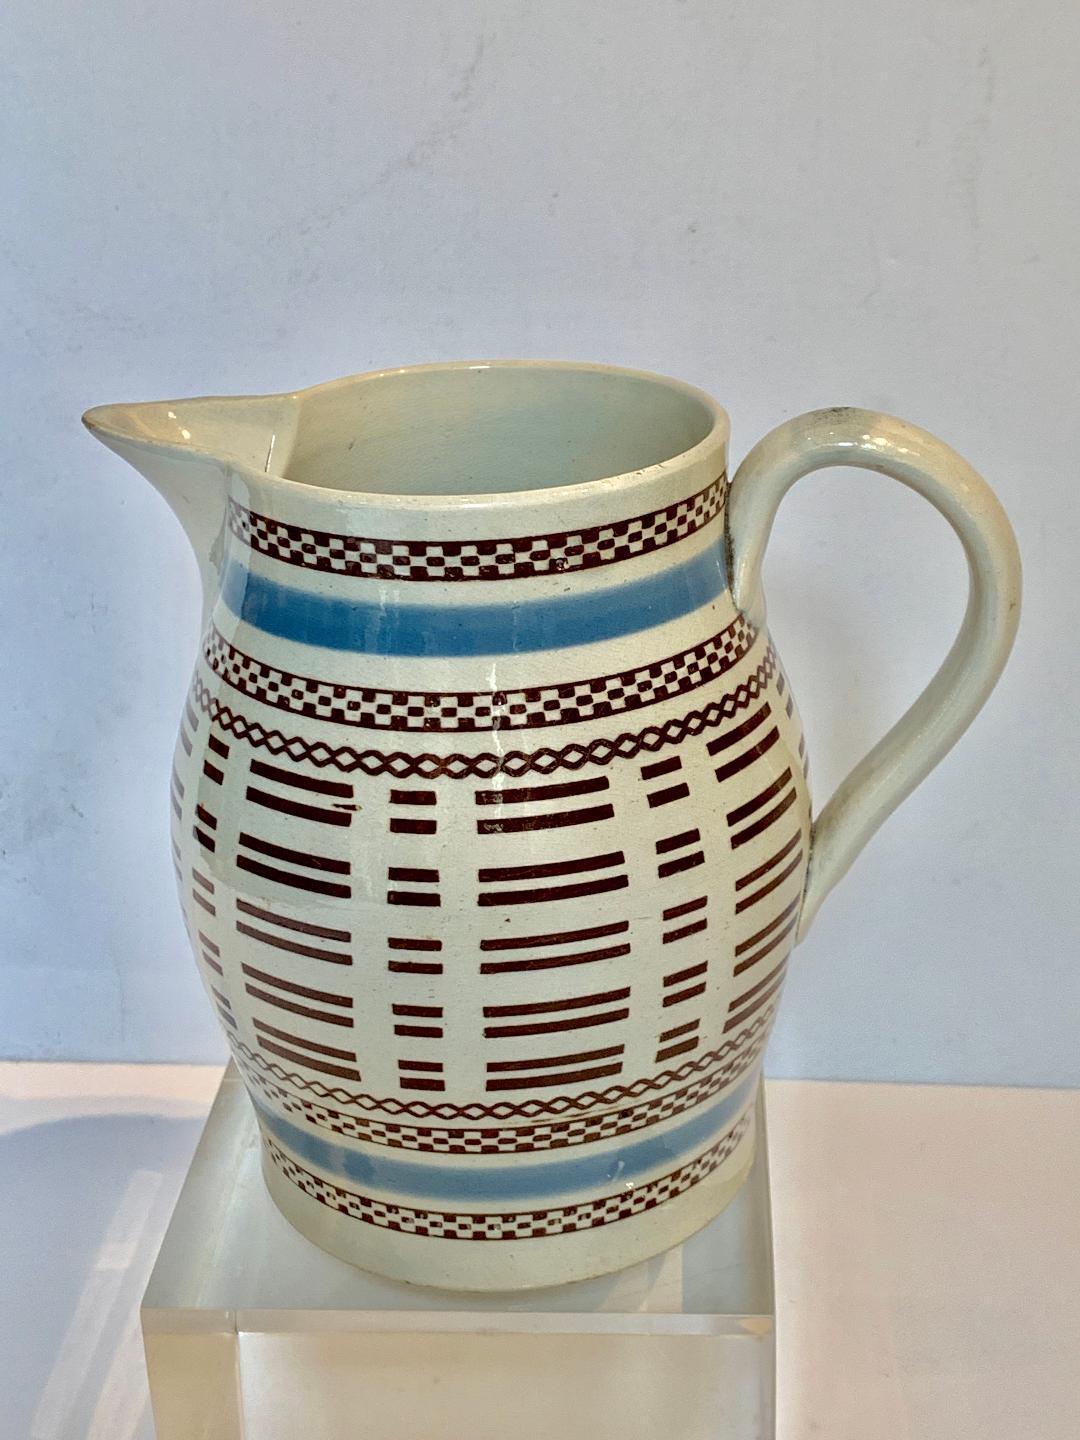 Mocha ware pitcher England, circa 1815. Decorated with baby blue bands of slip and bands of three geometric designs inlaid with black slip engine turning.
Dimensions: Diameter 3.75